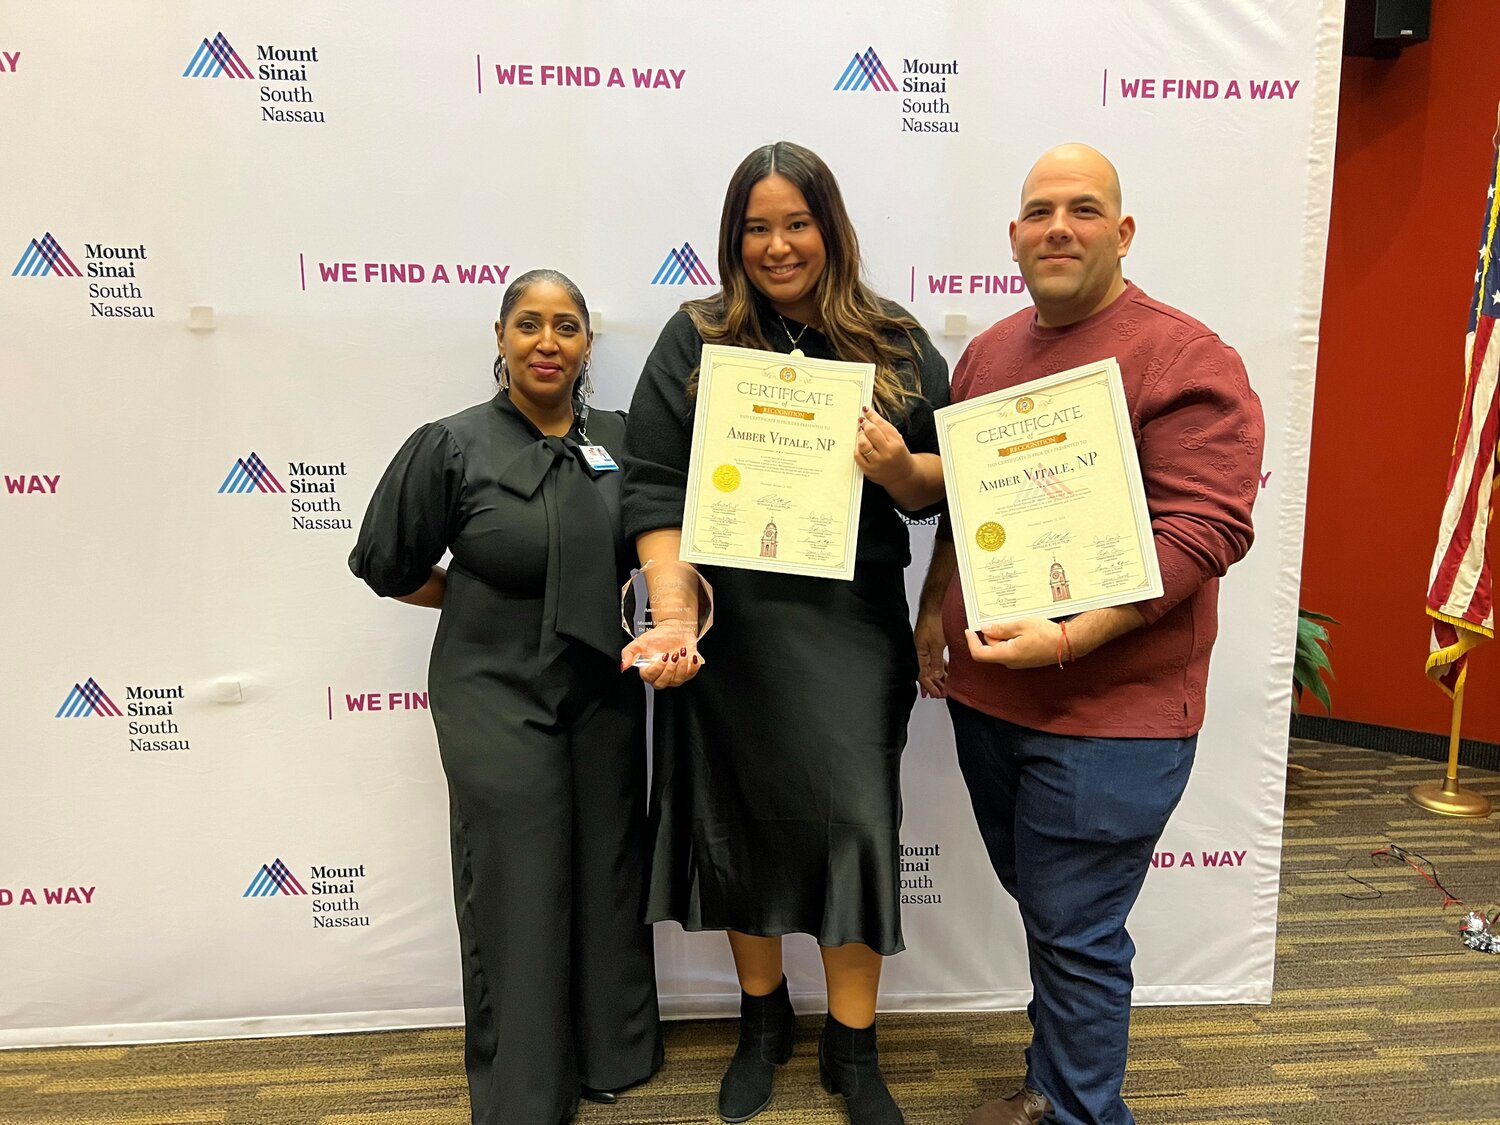 Karine Austin, assistant vice president and chair of Martin Luther King Jr. committee at Mount Sinai South Nassau, left, with Amber Vitale and her husband Joe Vitale proudly showing off commemorative plaque/glass emblem for being presented MSSN Martin Luther King Jr. Service award.